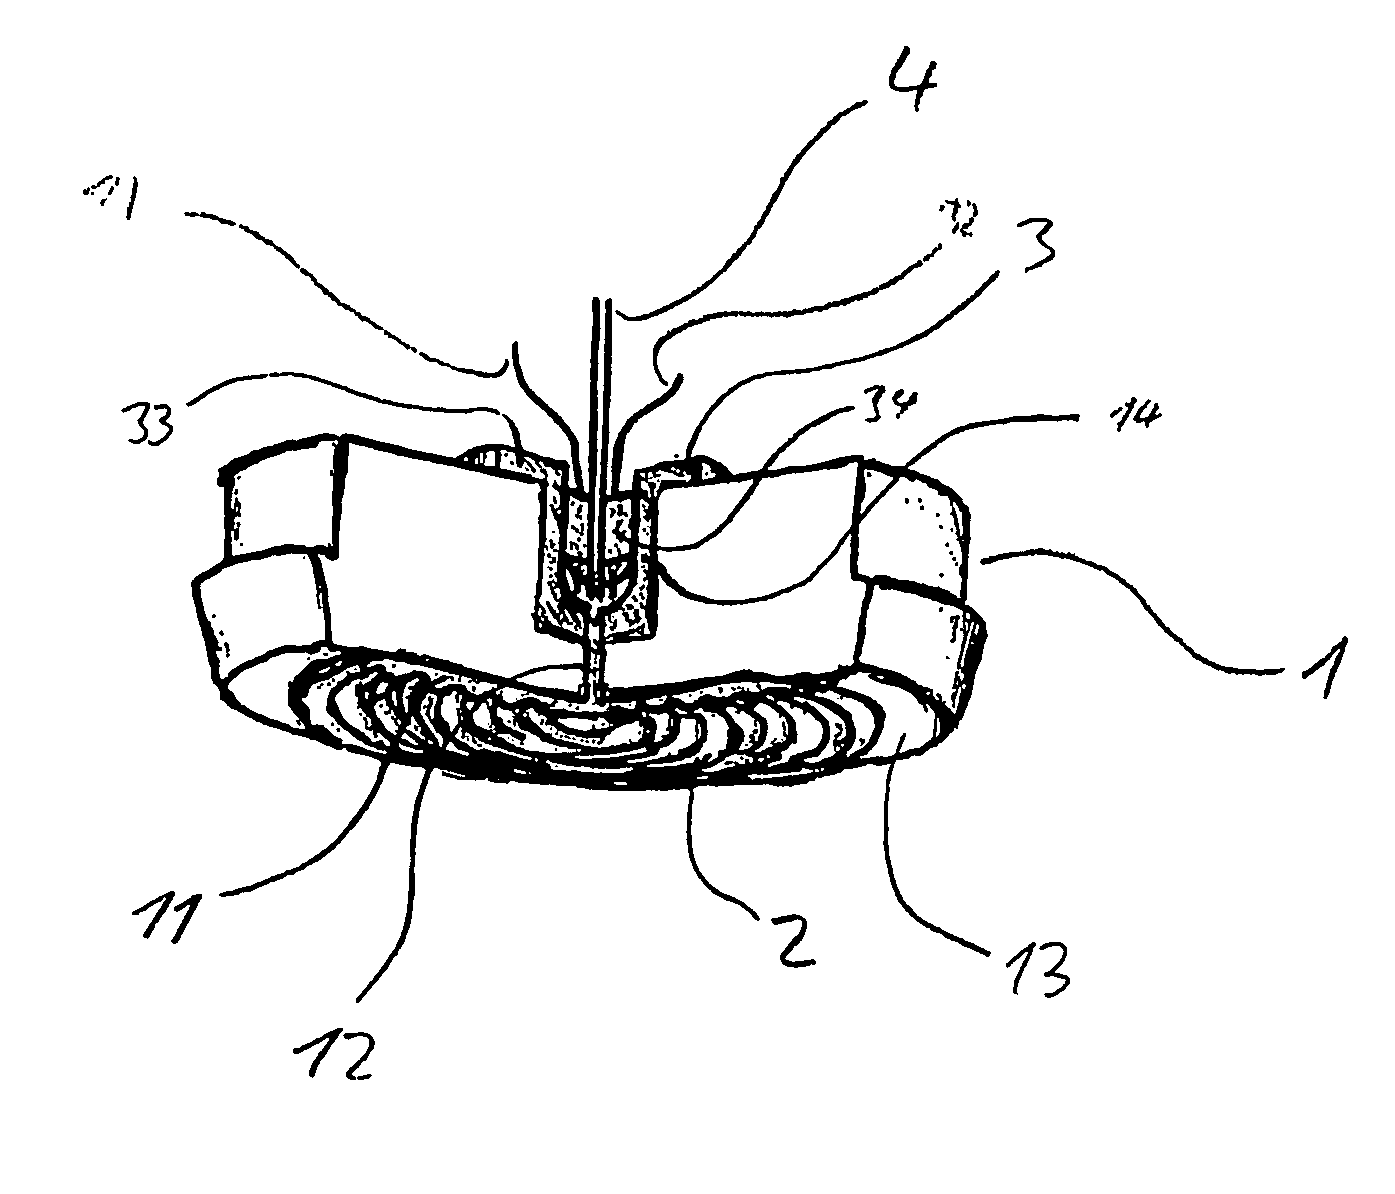 Pressure transmission system comprising a device for identifying membrane ruptures and connection adapter comprising a device for identifying membrane ruptures